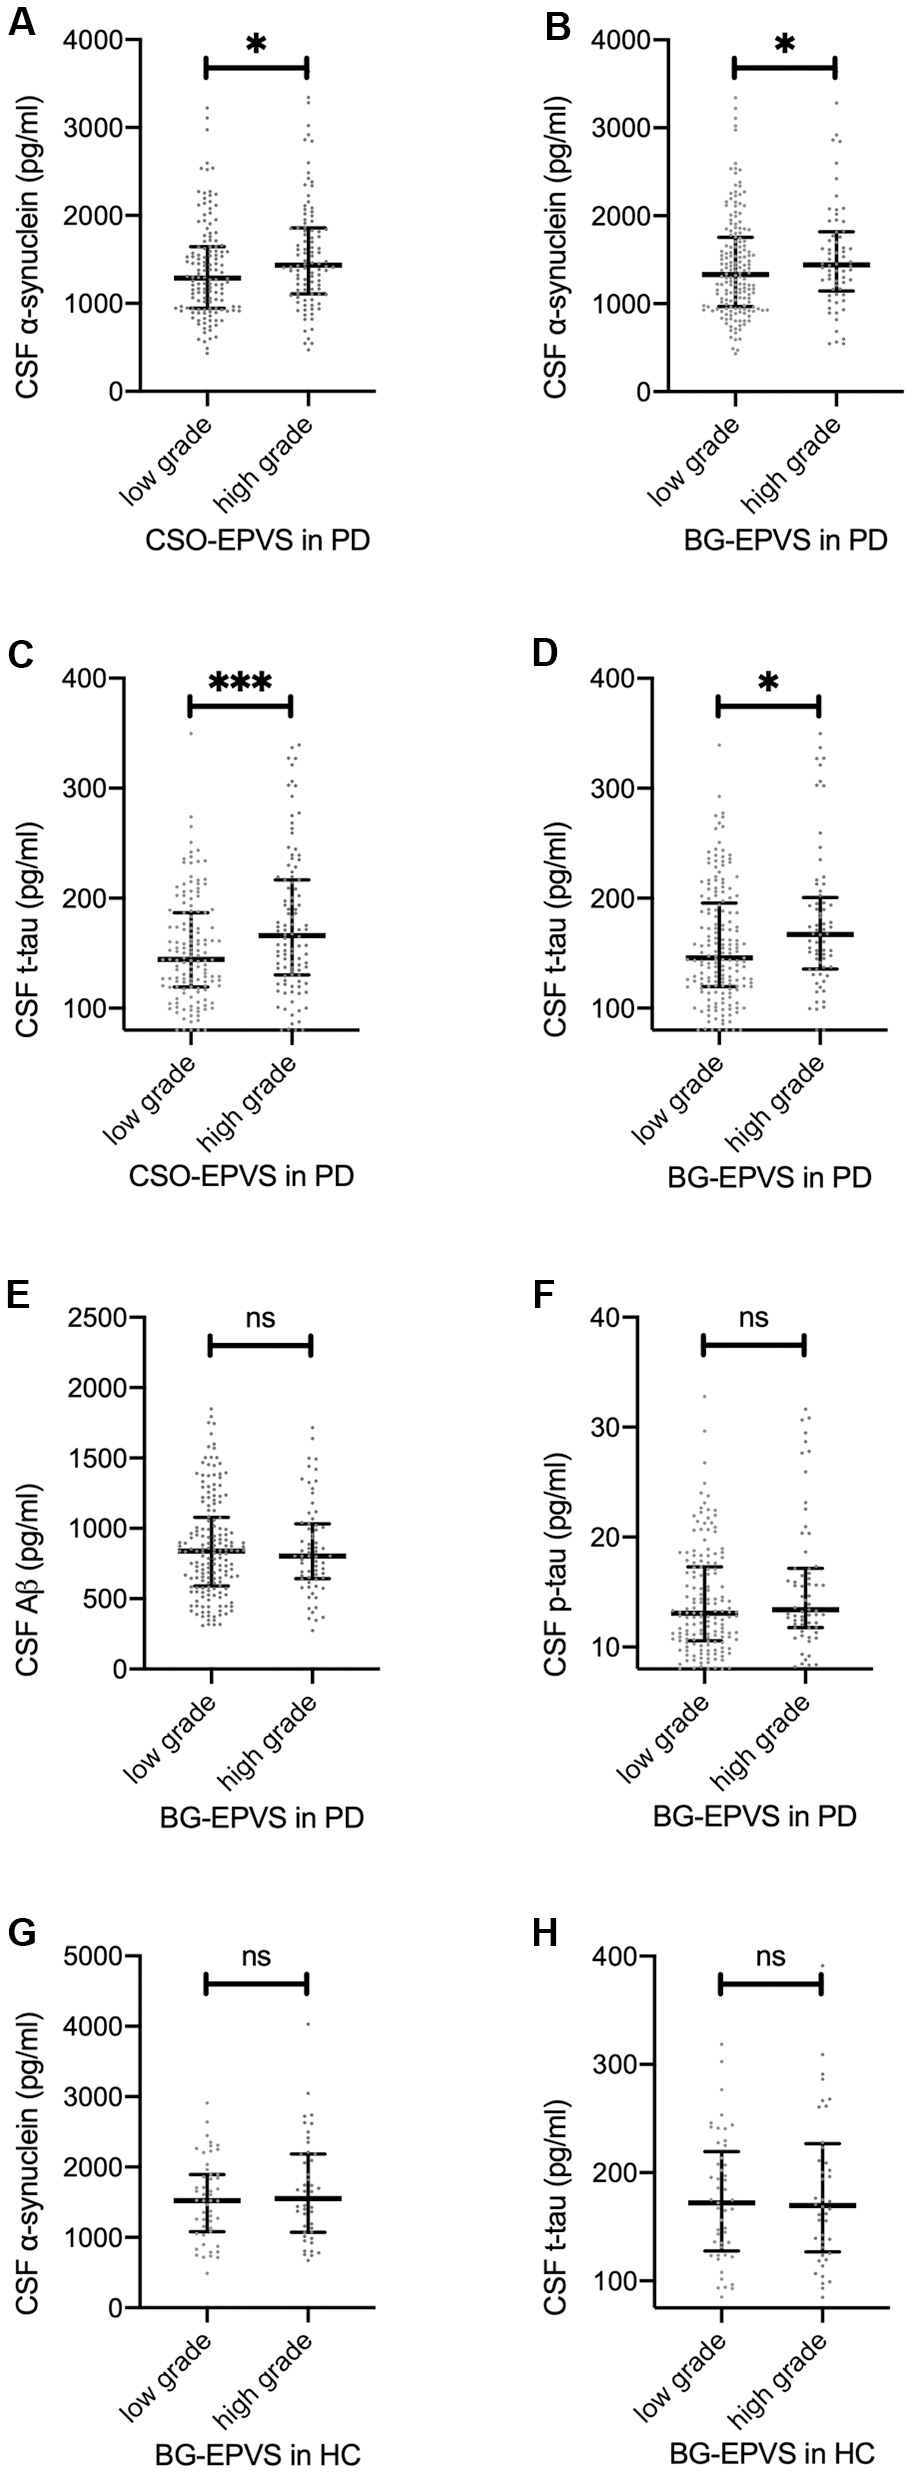 Association between EPVS and CSF proteins. (A–D): baseline CSF α-synuclein (A, B) and t-tau (C, D) values separated by low/high grade CSO EPVS (A, C) and BG EPVS (B, D) in patients with PD. (E, F): baseline CSF Aβ (E) and p-tau (F) values separated by low/high grade BG-EPVS in patients with PD. (G, H): baseline CSF α-synuclein (G) and t-tau (H) values separated by low/high grade BG-EPVS in patients with PD. Lines represent median with interquartile range. Significance on figures represent Spearman correlation of baseline EPVS and CSF proteins. For result of repeated measure linear mixed model, please refer to Table 2.